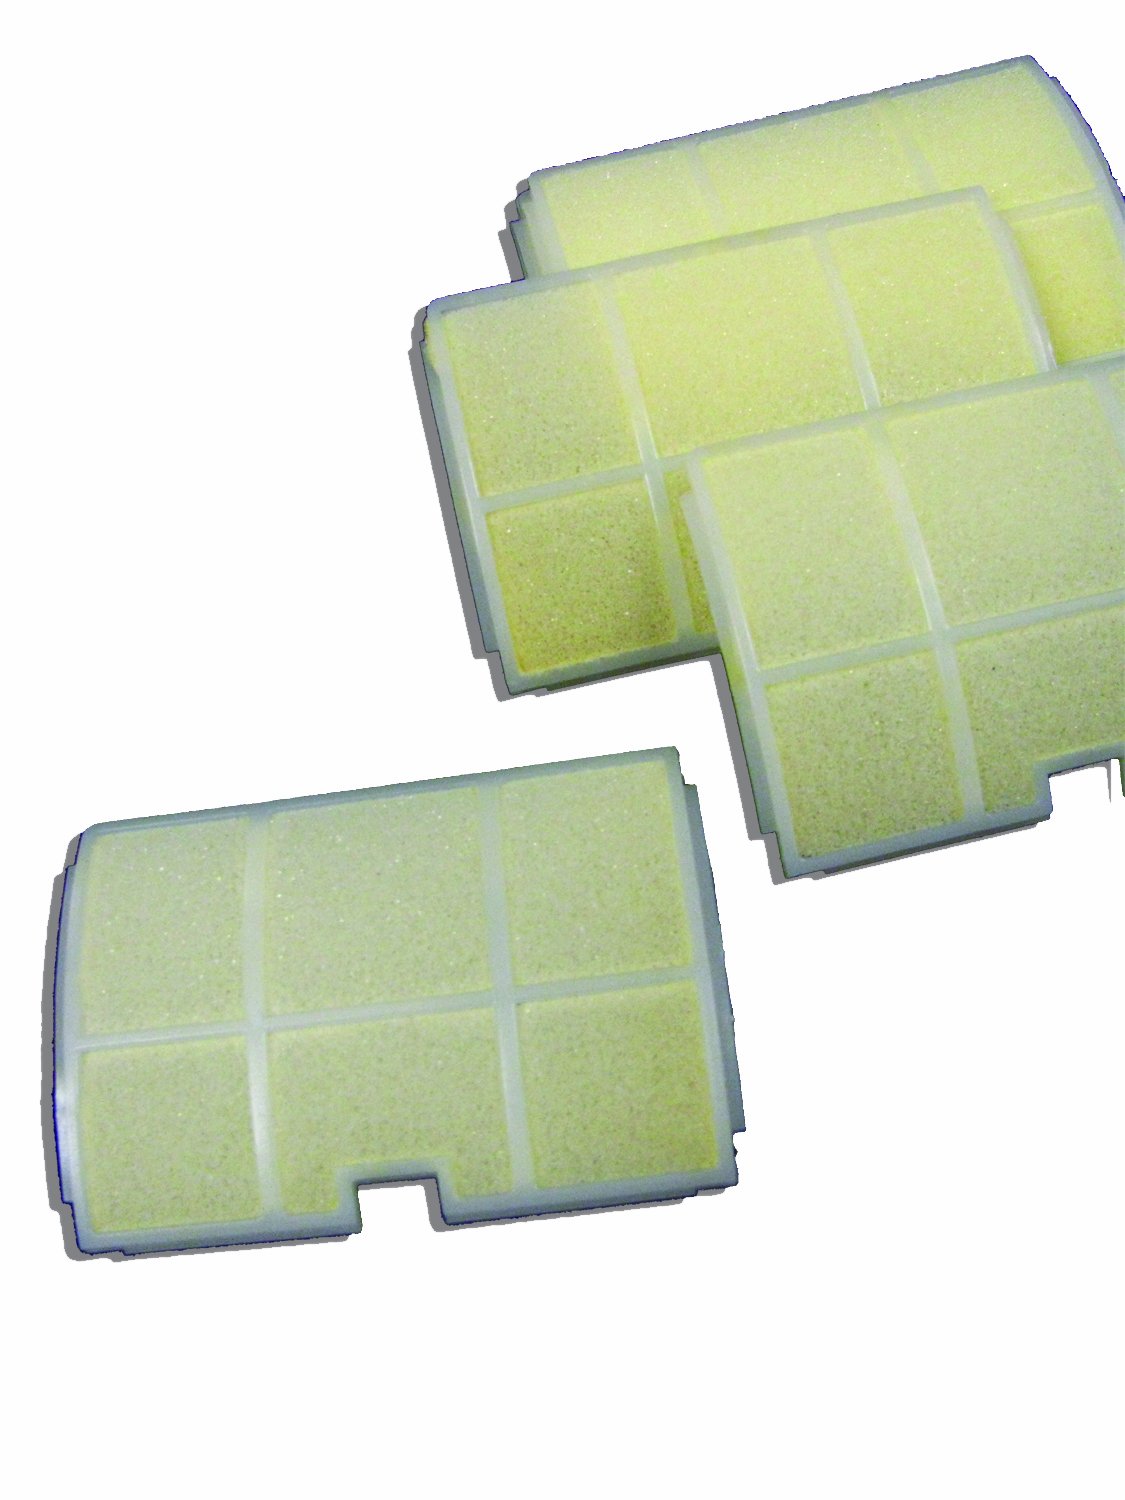 Green Klean GK-5143 Replacement Exhaust Filter (Pack of 50)